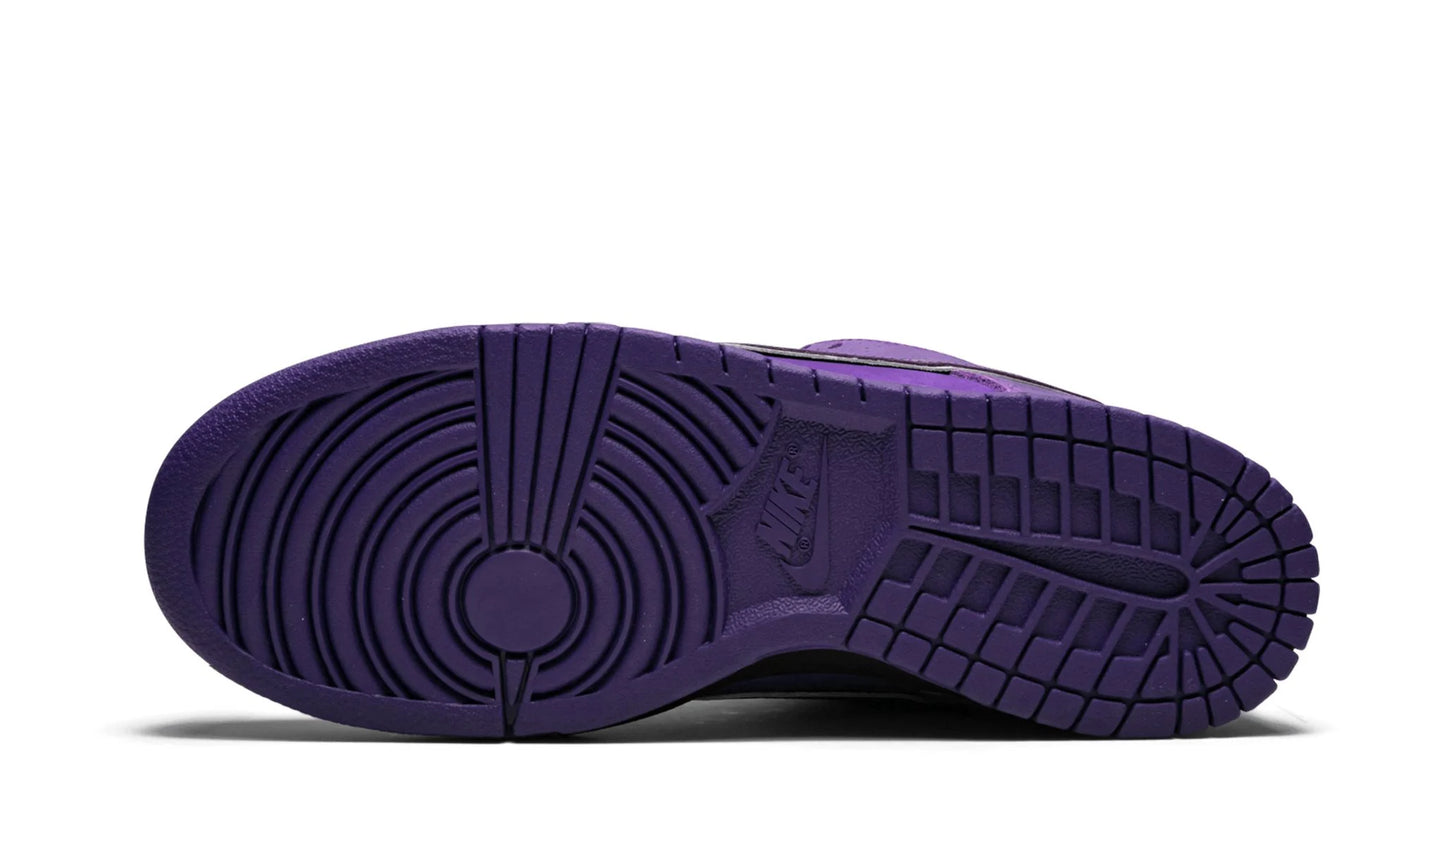 Nike SB Dunk Low 'Concepts - Purple Lobster'